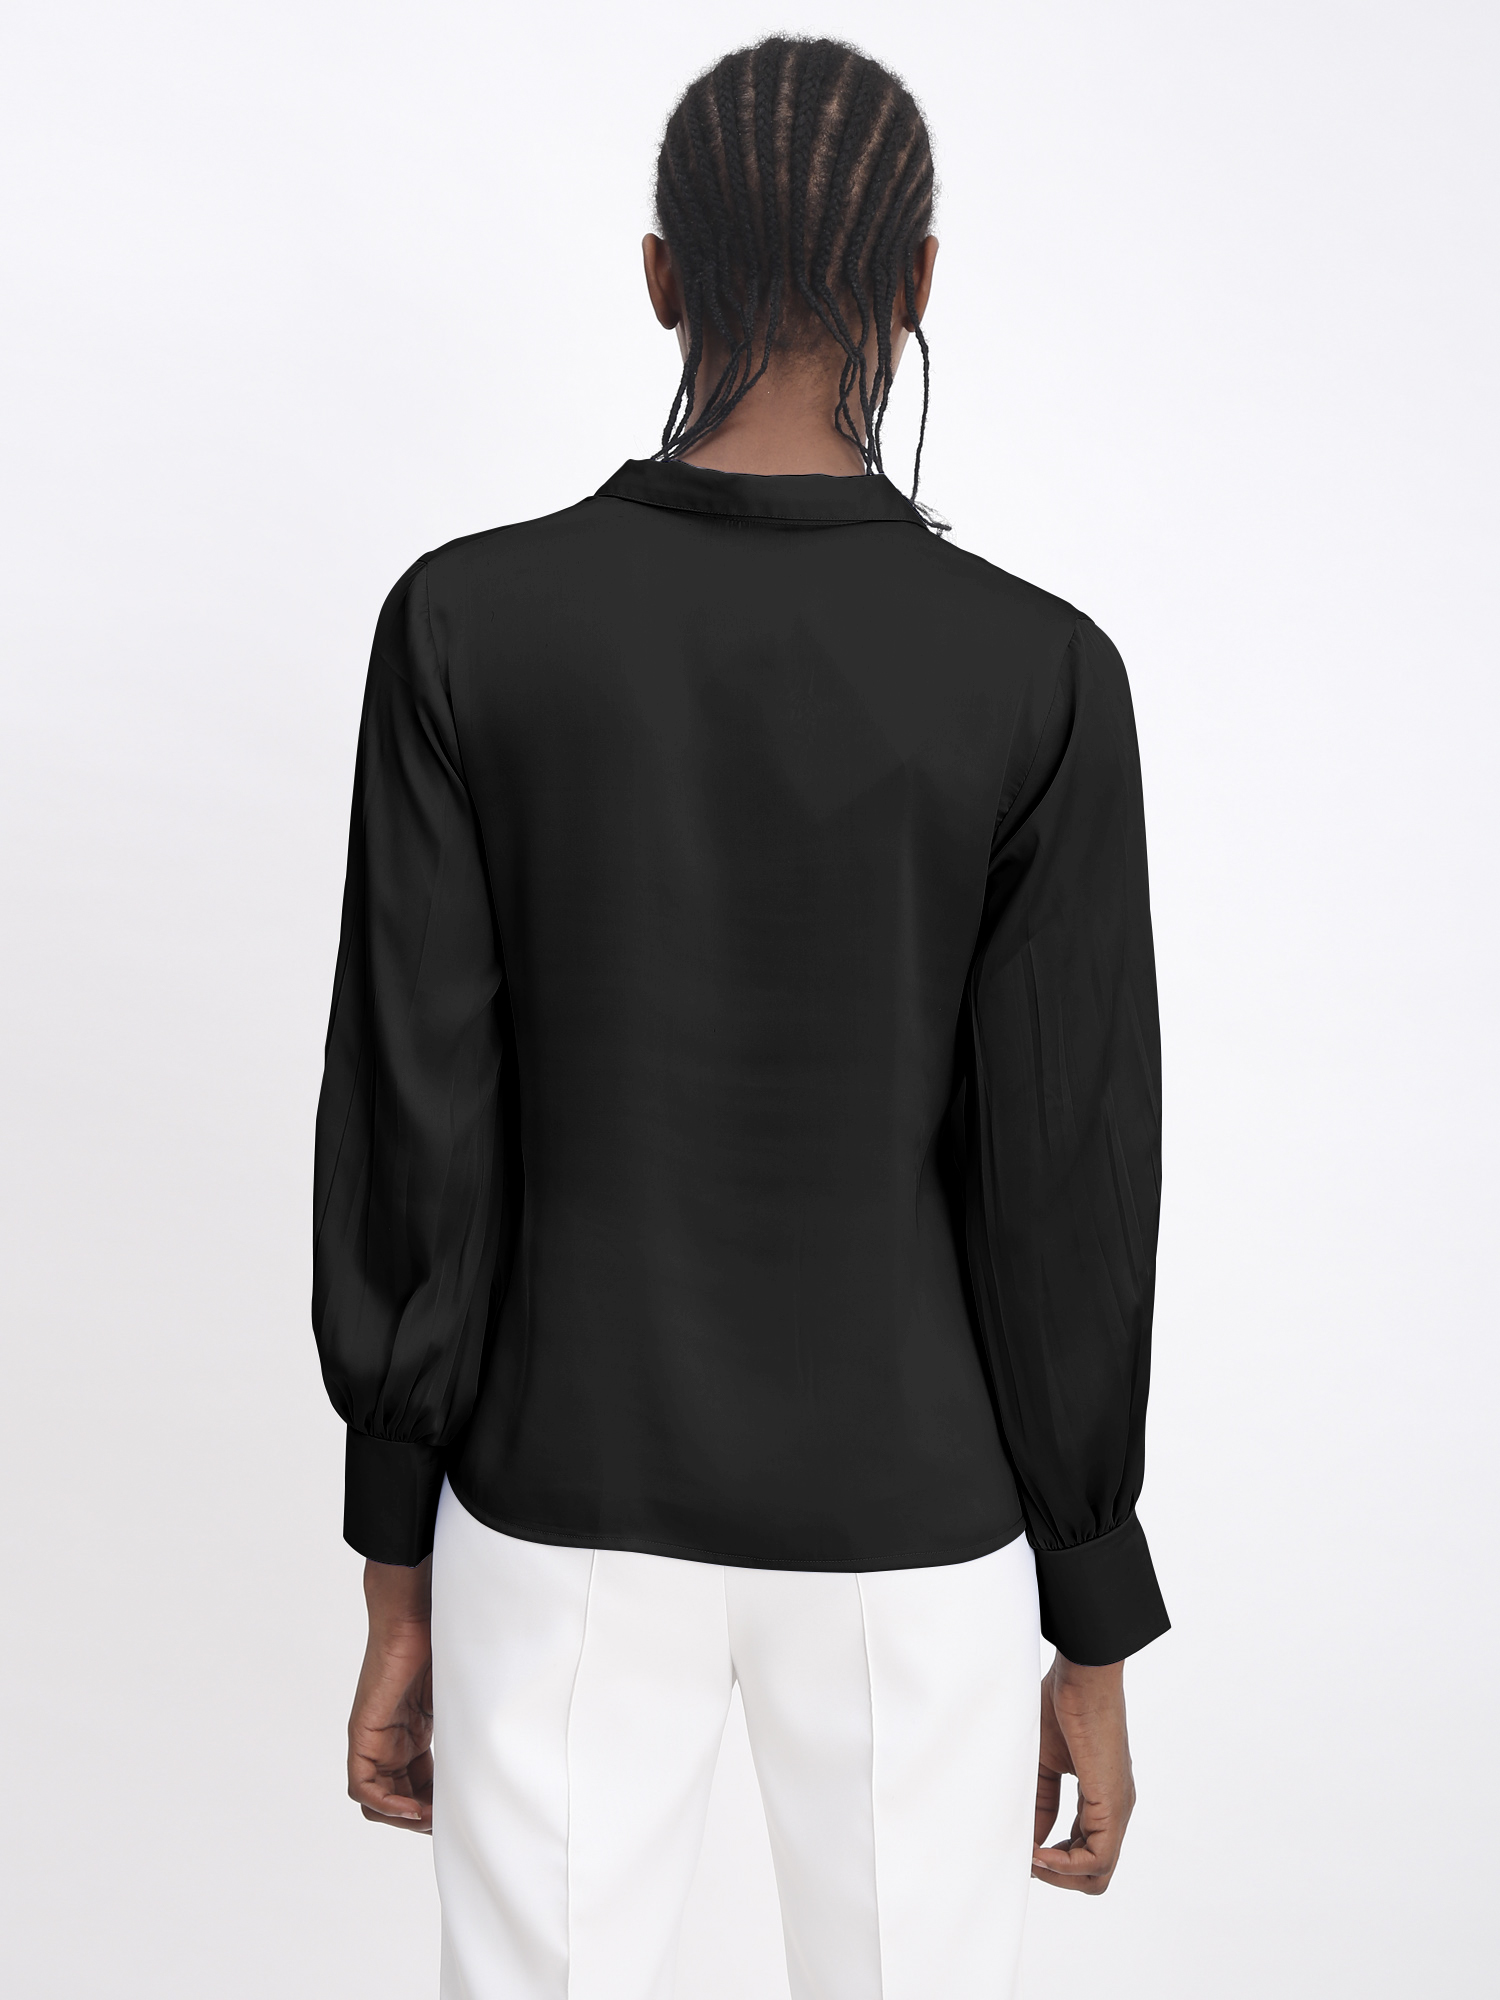 Pastel Shirt With Puffed Sleeves Black - Back